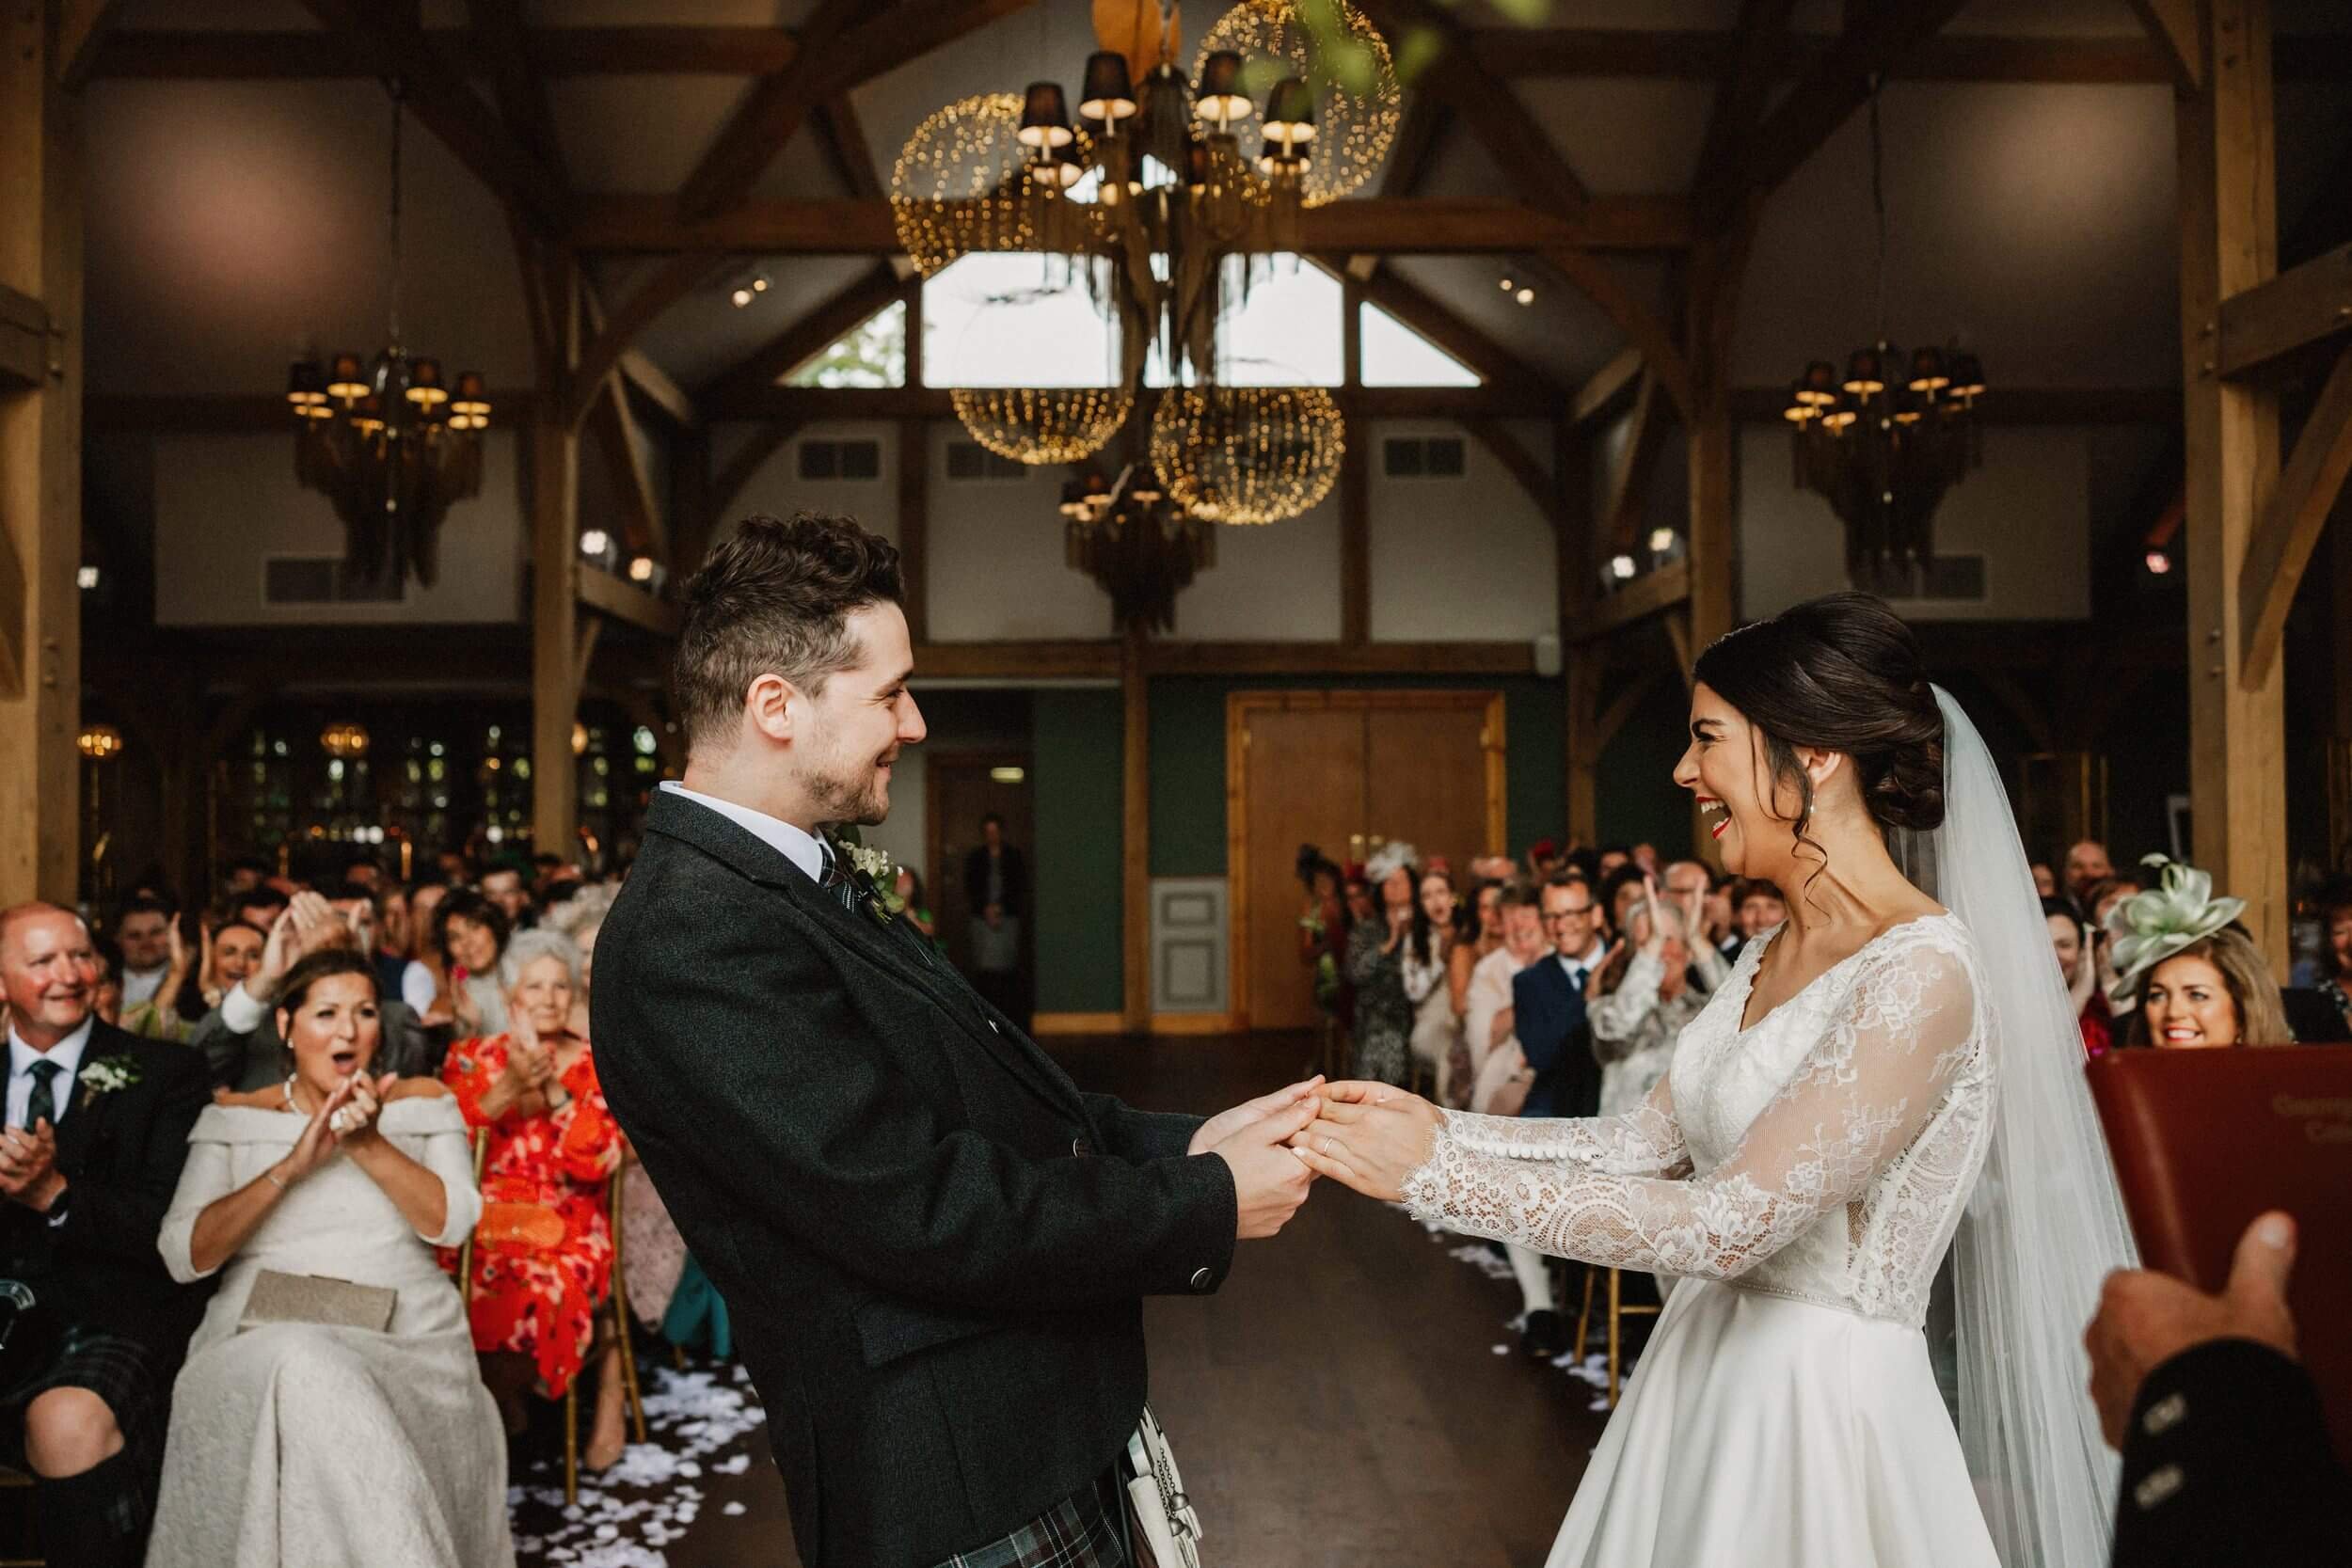 glasgow wedding photographer captures the bride and groom smiling and holding hands at the head of the aisle as guests watch smiling and applauding